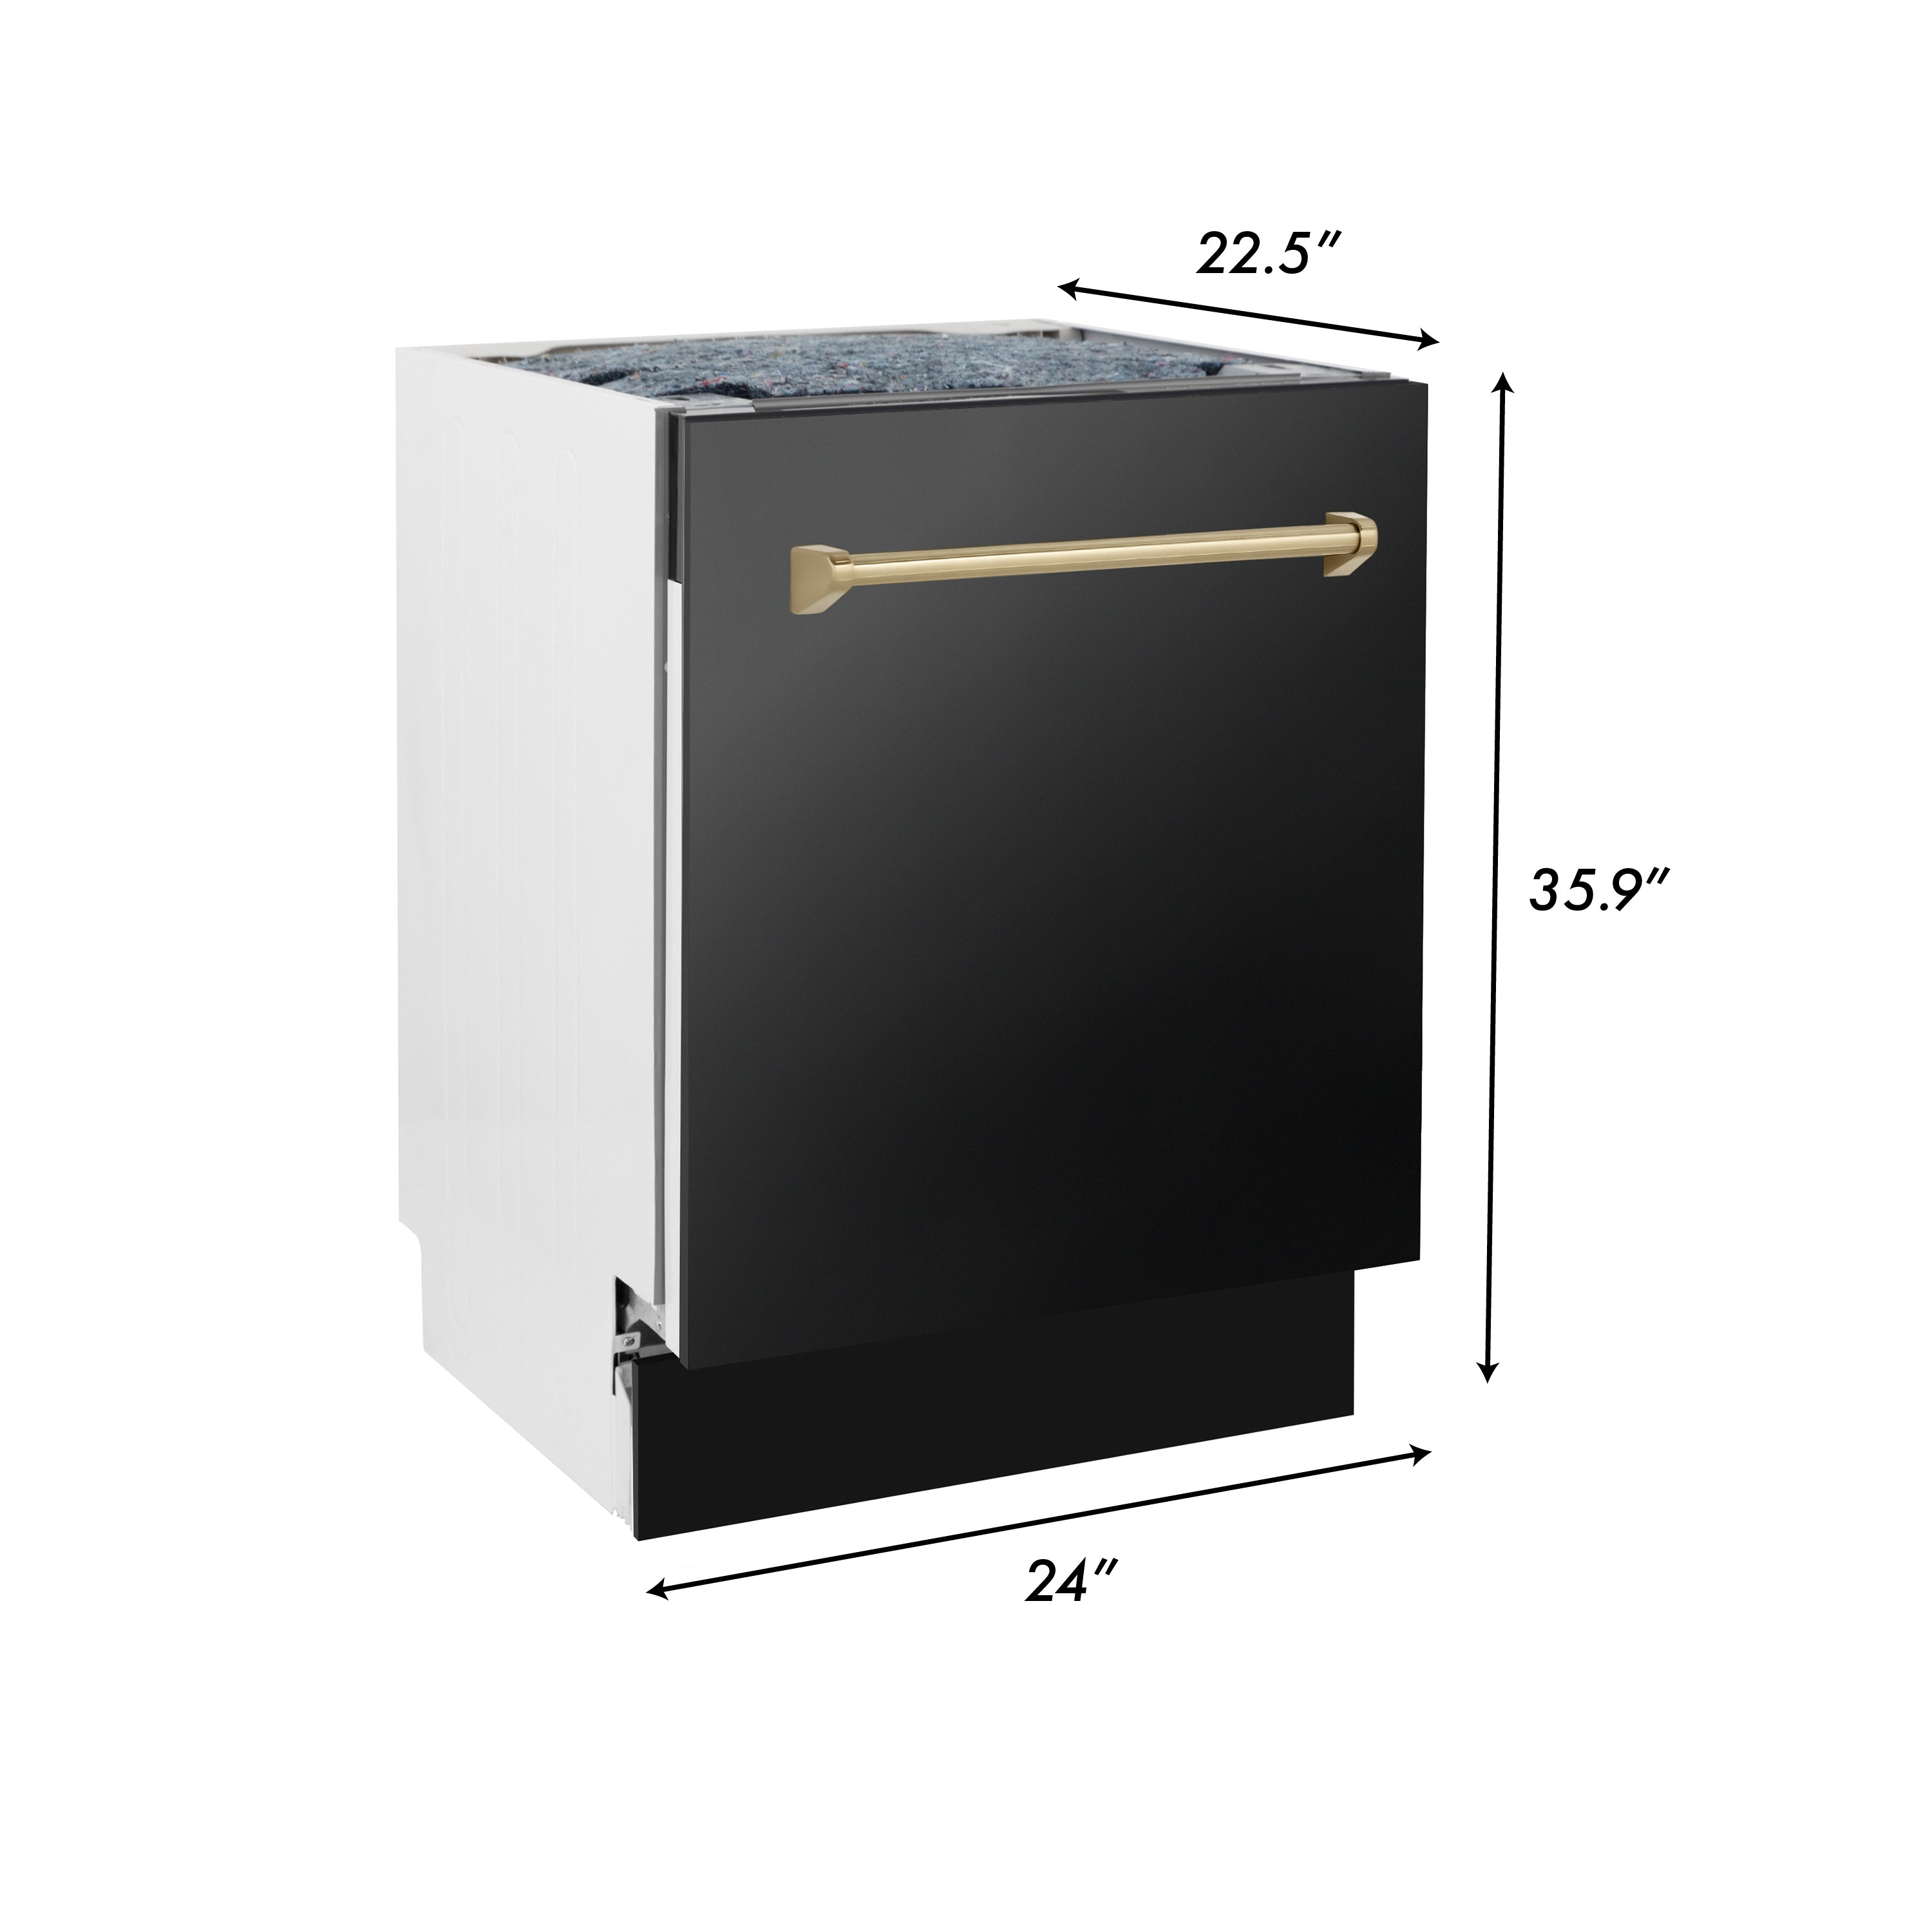 ZLINE 48" Autograph Edition Kitchen Package with Black Stainless Steel Dual Fuel Range, Range Hood and Dishwasher with Champagne Bronze Accents (3AKP-RABRHDWV48-CB)